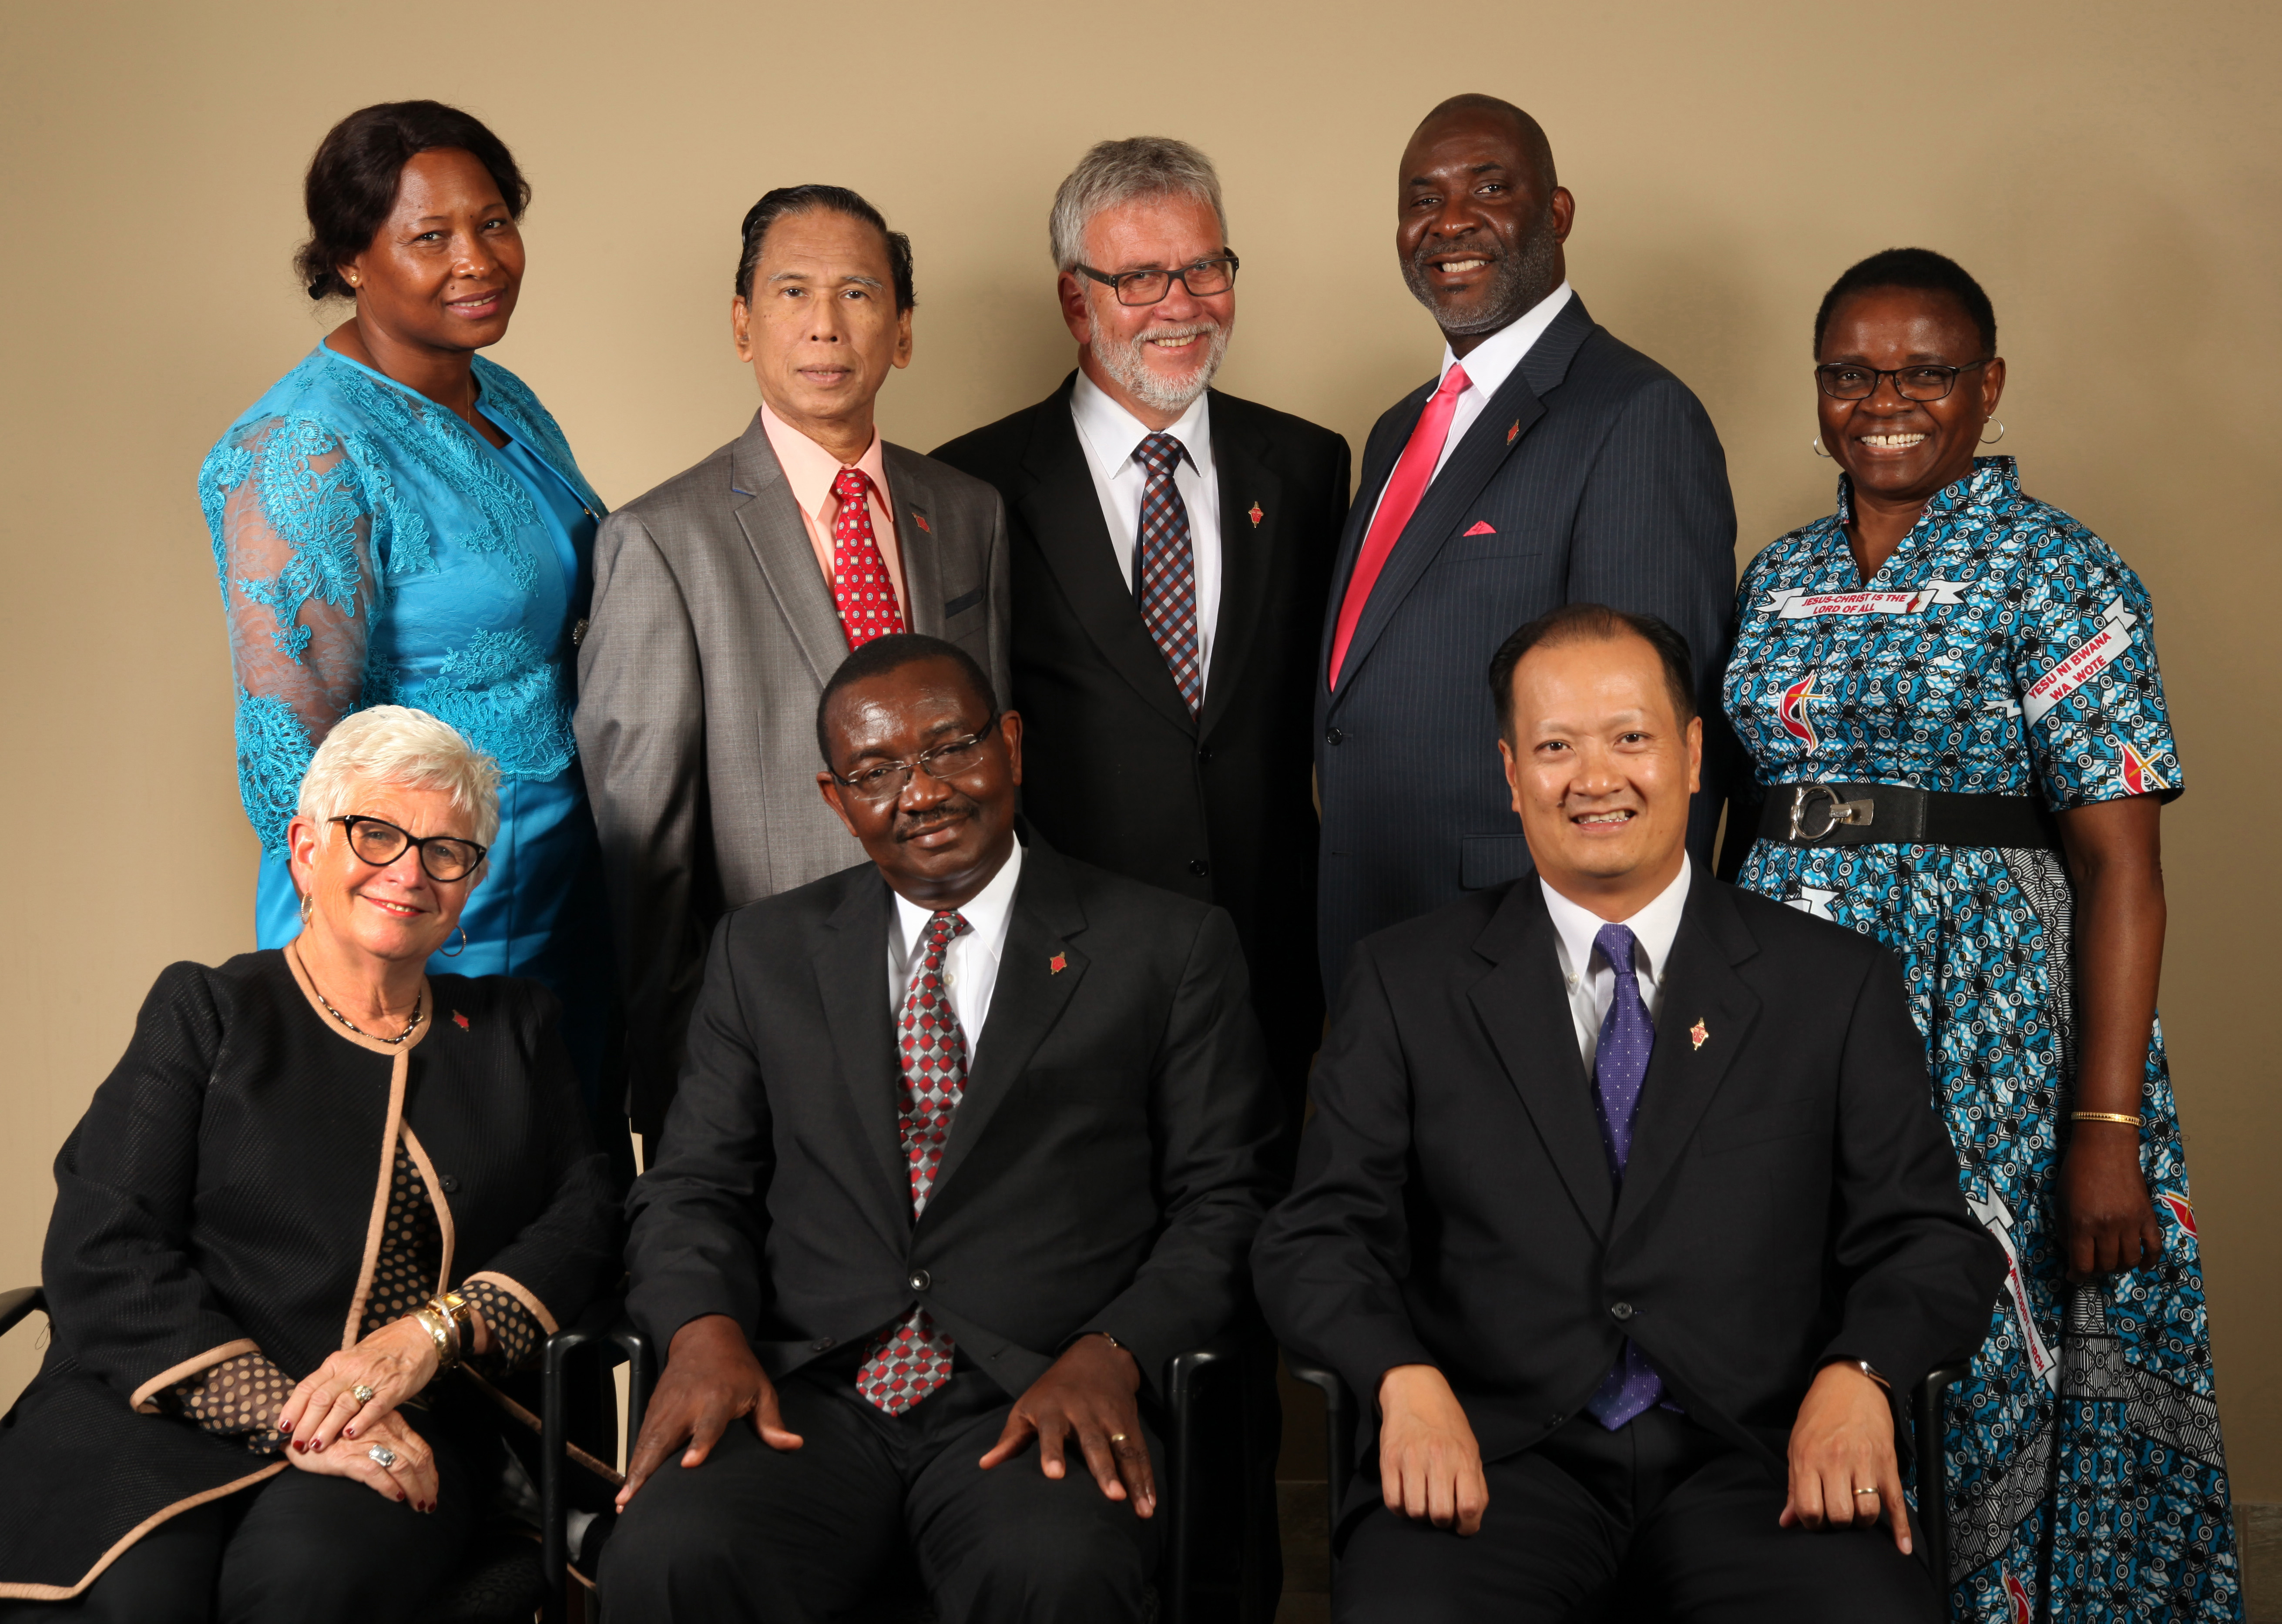 Members of the 2016-2020 Judicial Council. (From left) Front row: Deanell Reece Tacha, N. Oswald Tweh Sr., the Rev. Luan-Vu Tran. Back row: Lydia Romão Gulele, Ruben T. Reyes, the Rev.Øyvind Helliesen, the Rev. Dennis Blackwell, and the Rev. J. Kabamba Kiboko. (Not pictured, Beth Capen)  Photo by Kathleen Barry, United Methodist Communications